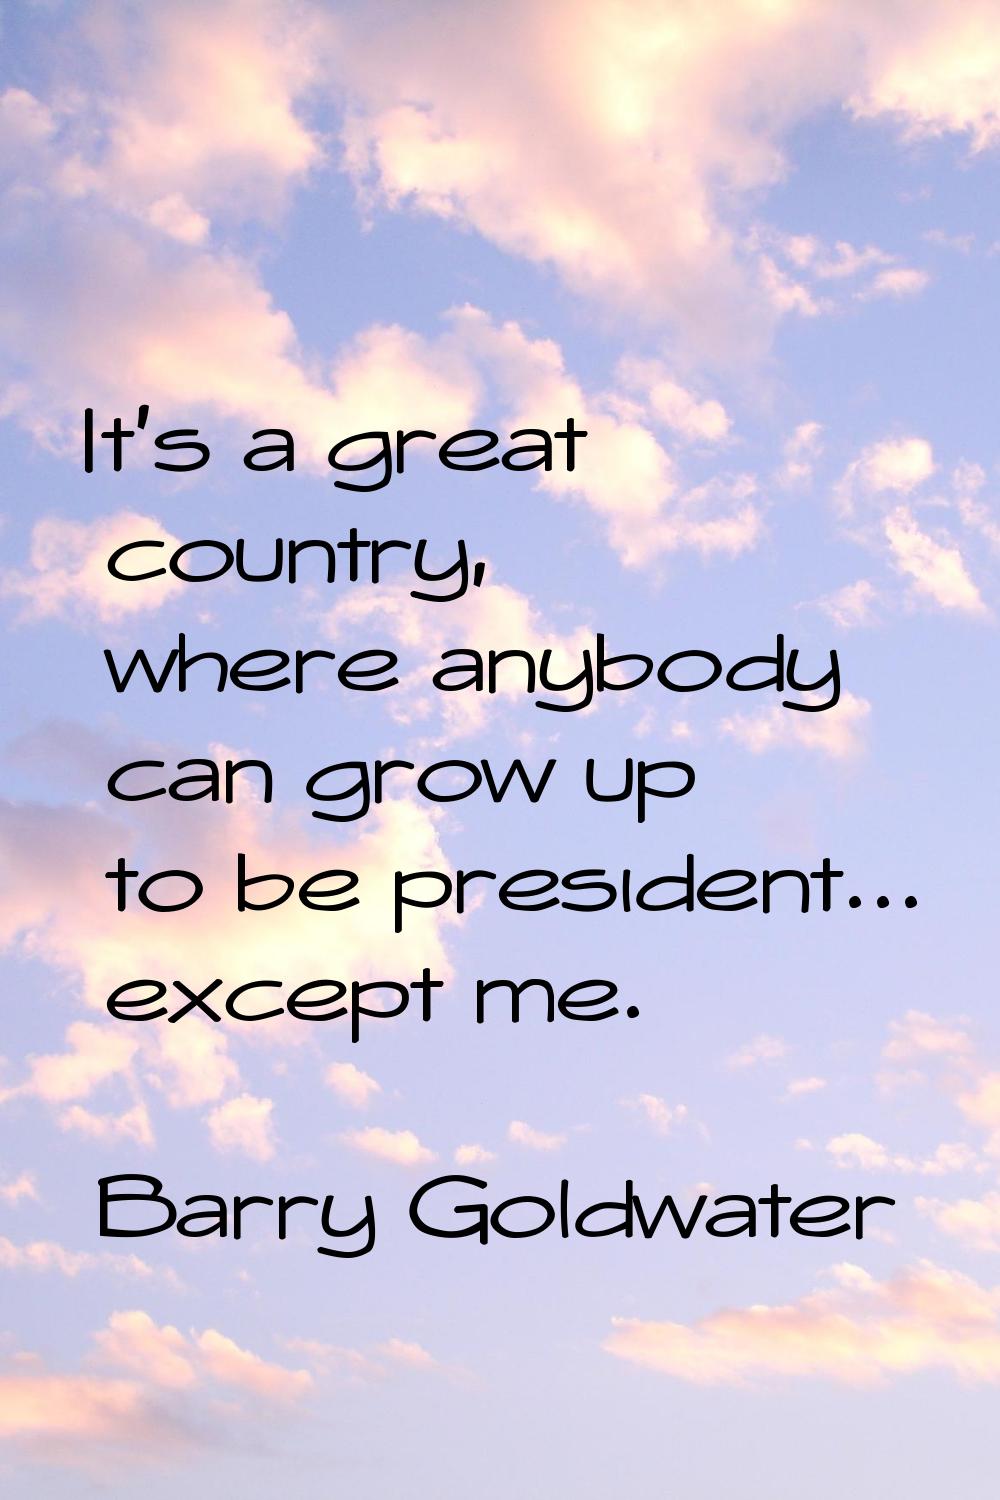 It's a great country, where anybody can grow up to be president... except me.